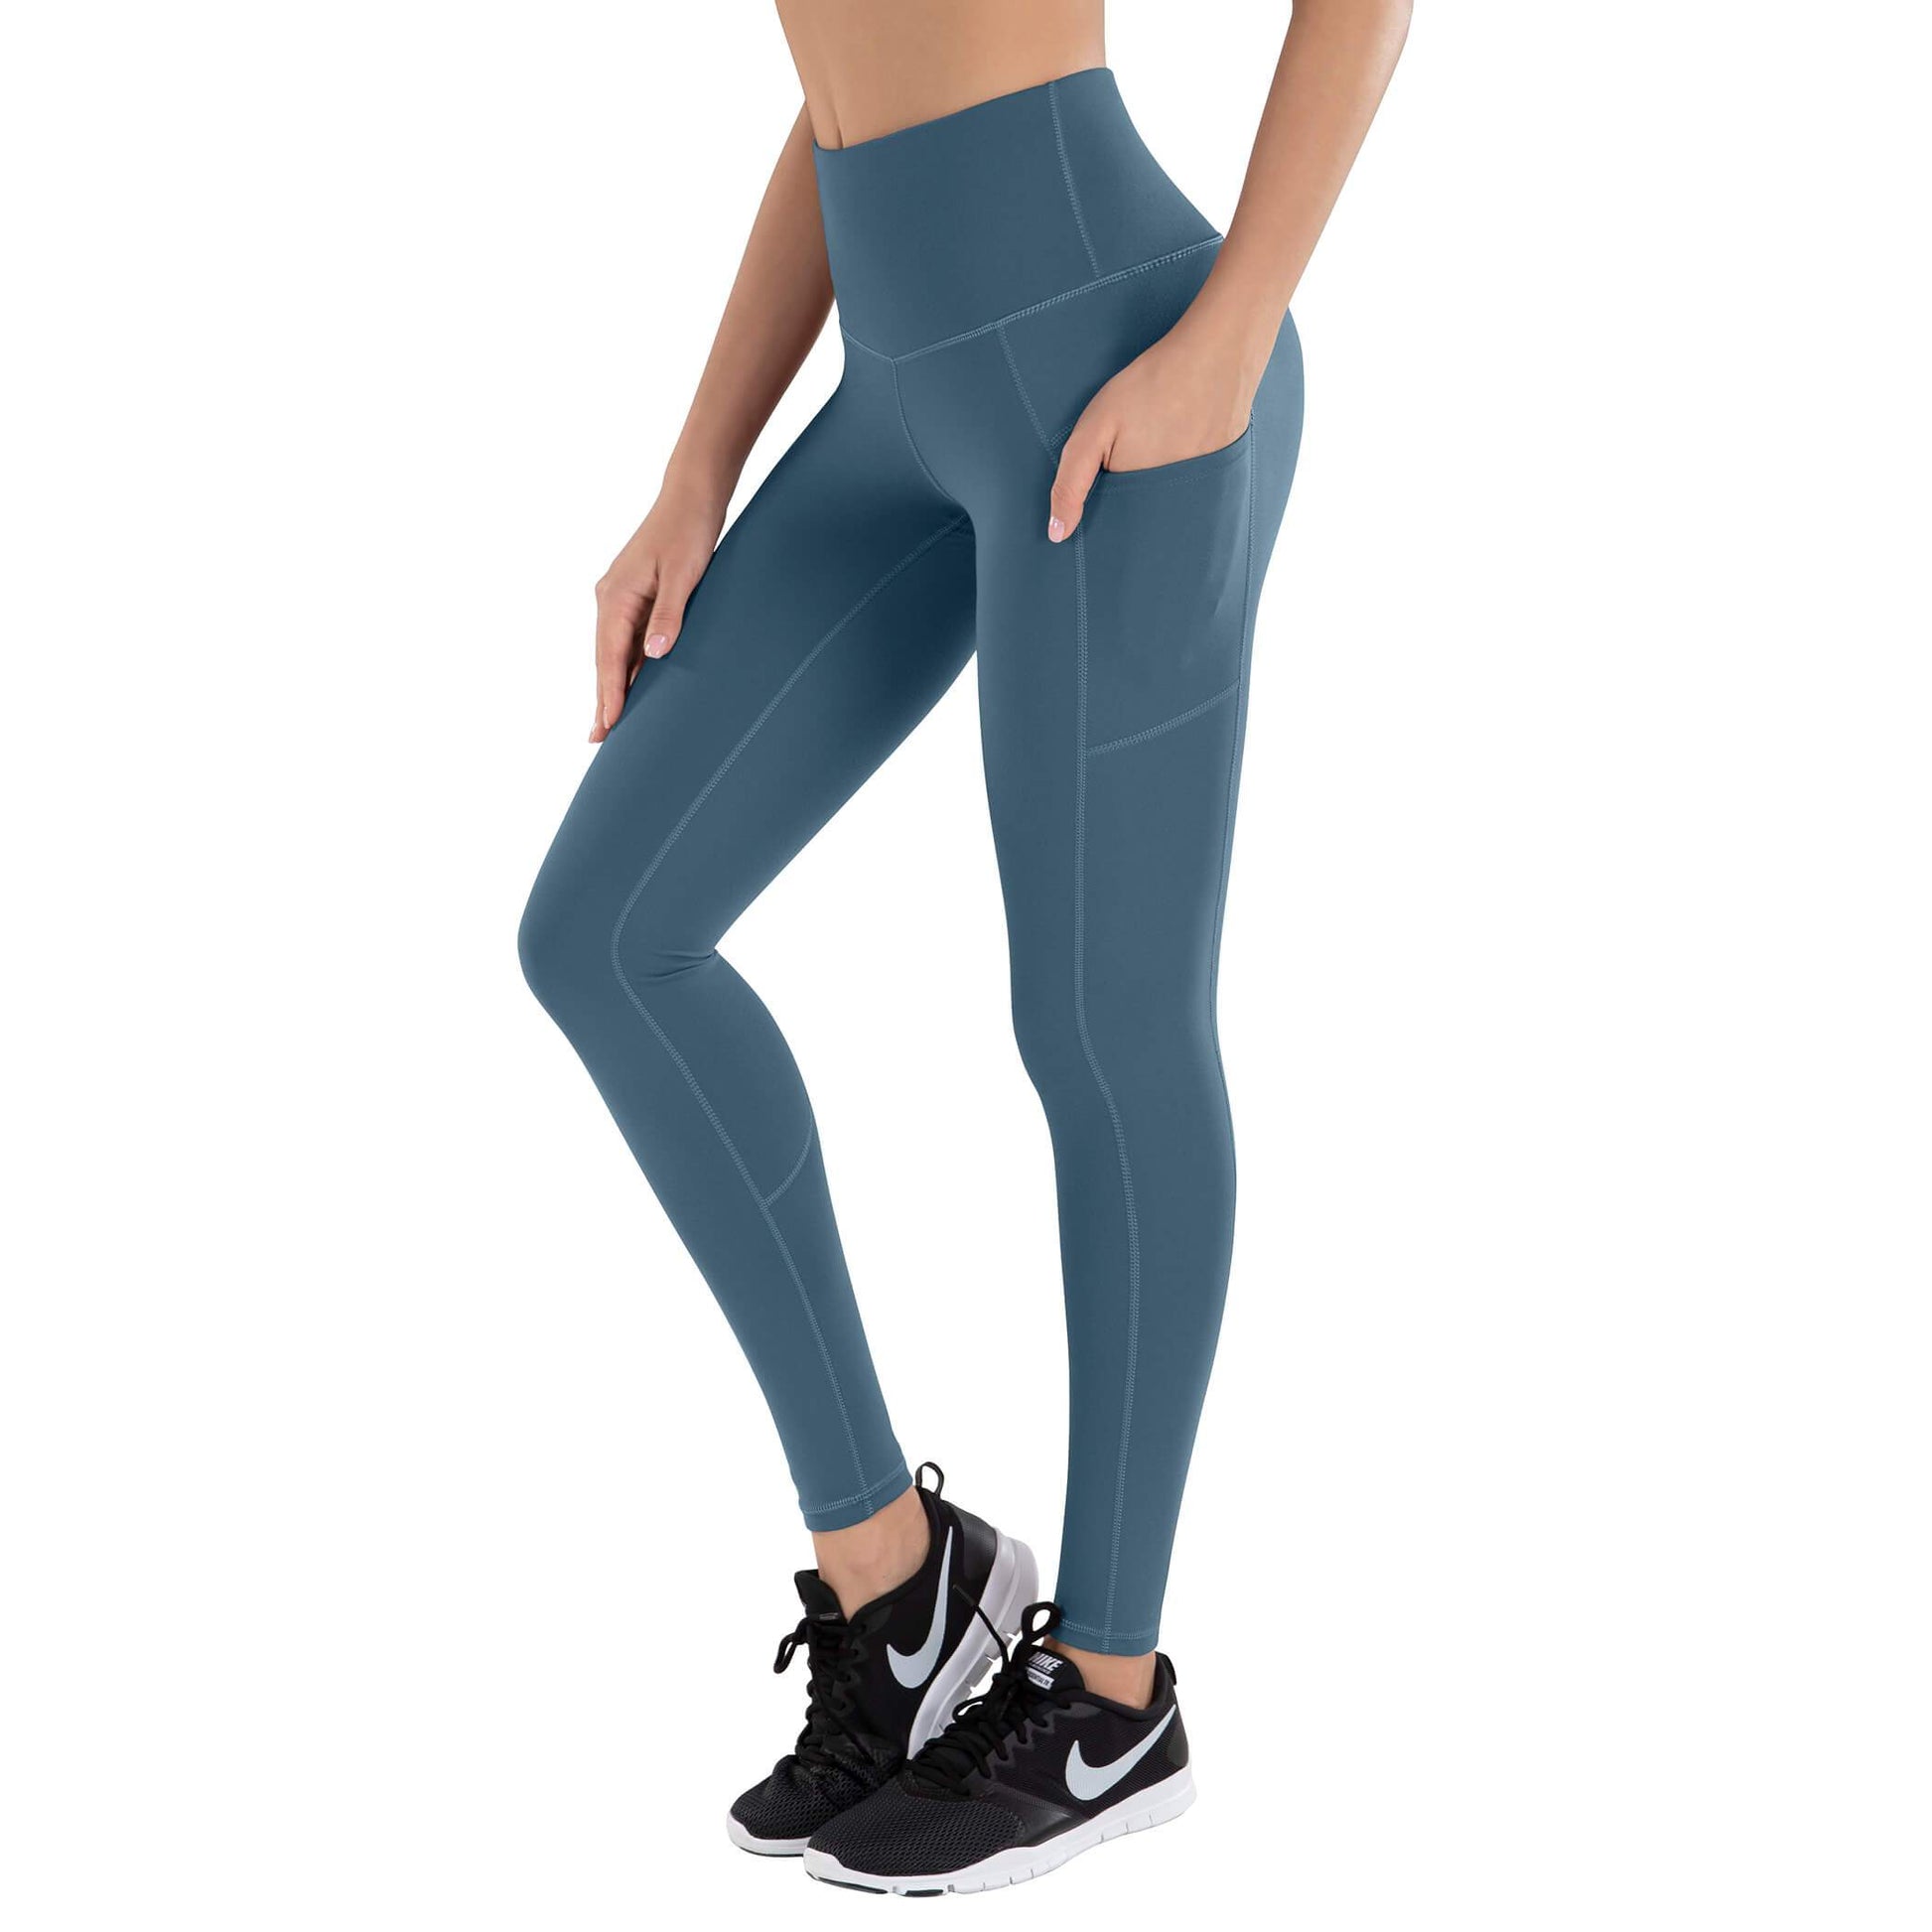 Buy LifeSky Yoga Pants with Pockets for Women, High Waisted Tummy